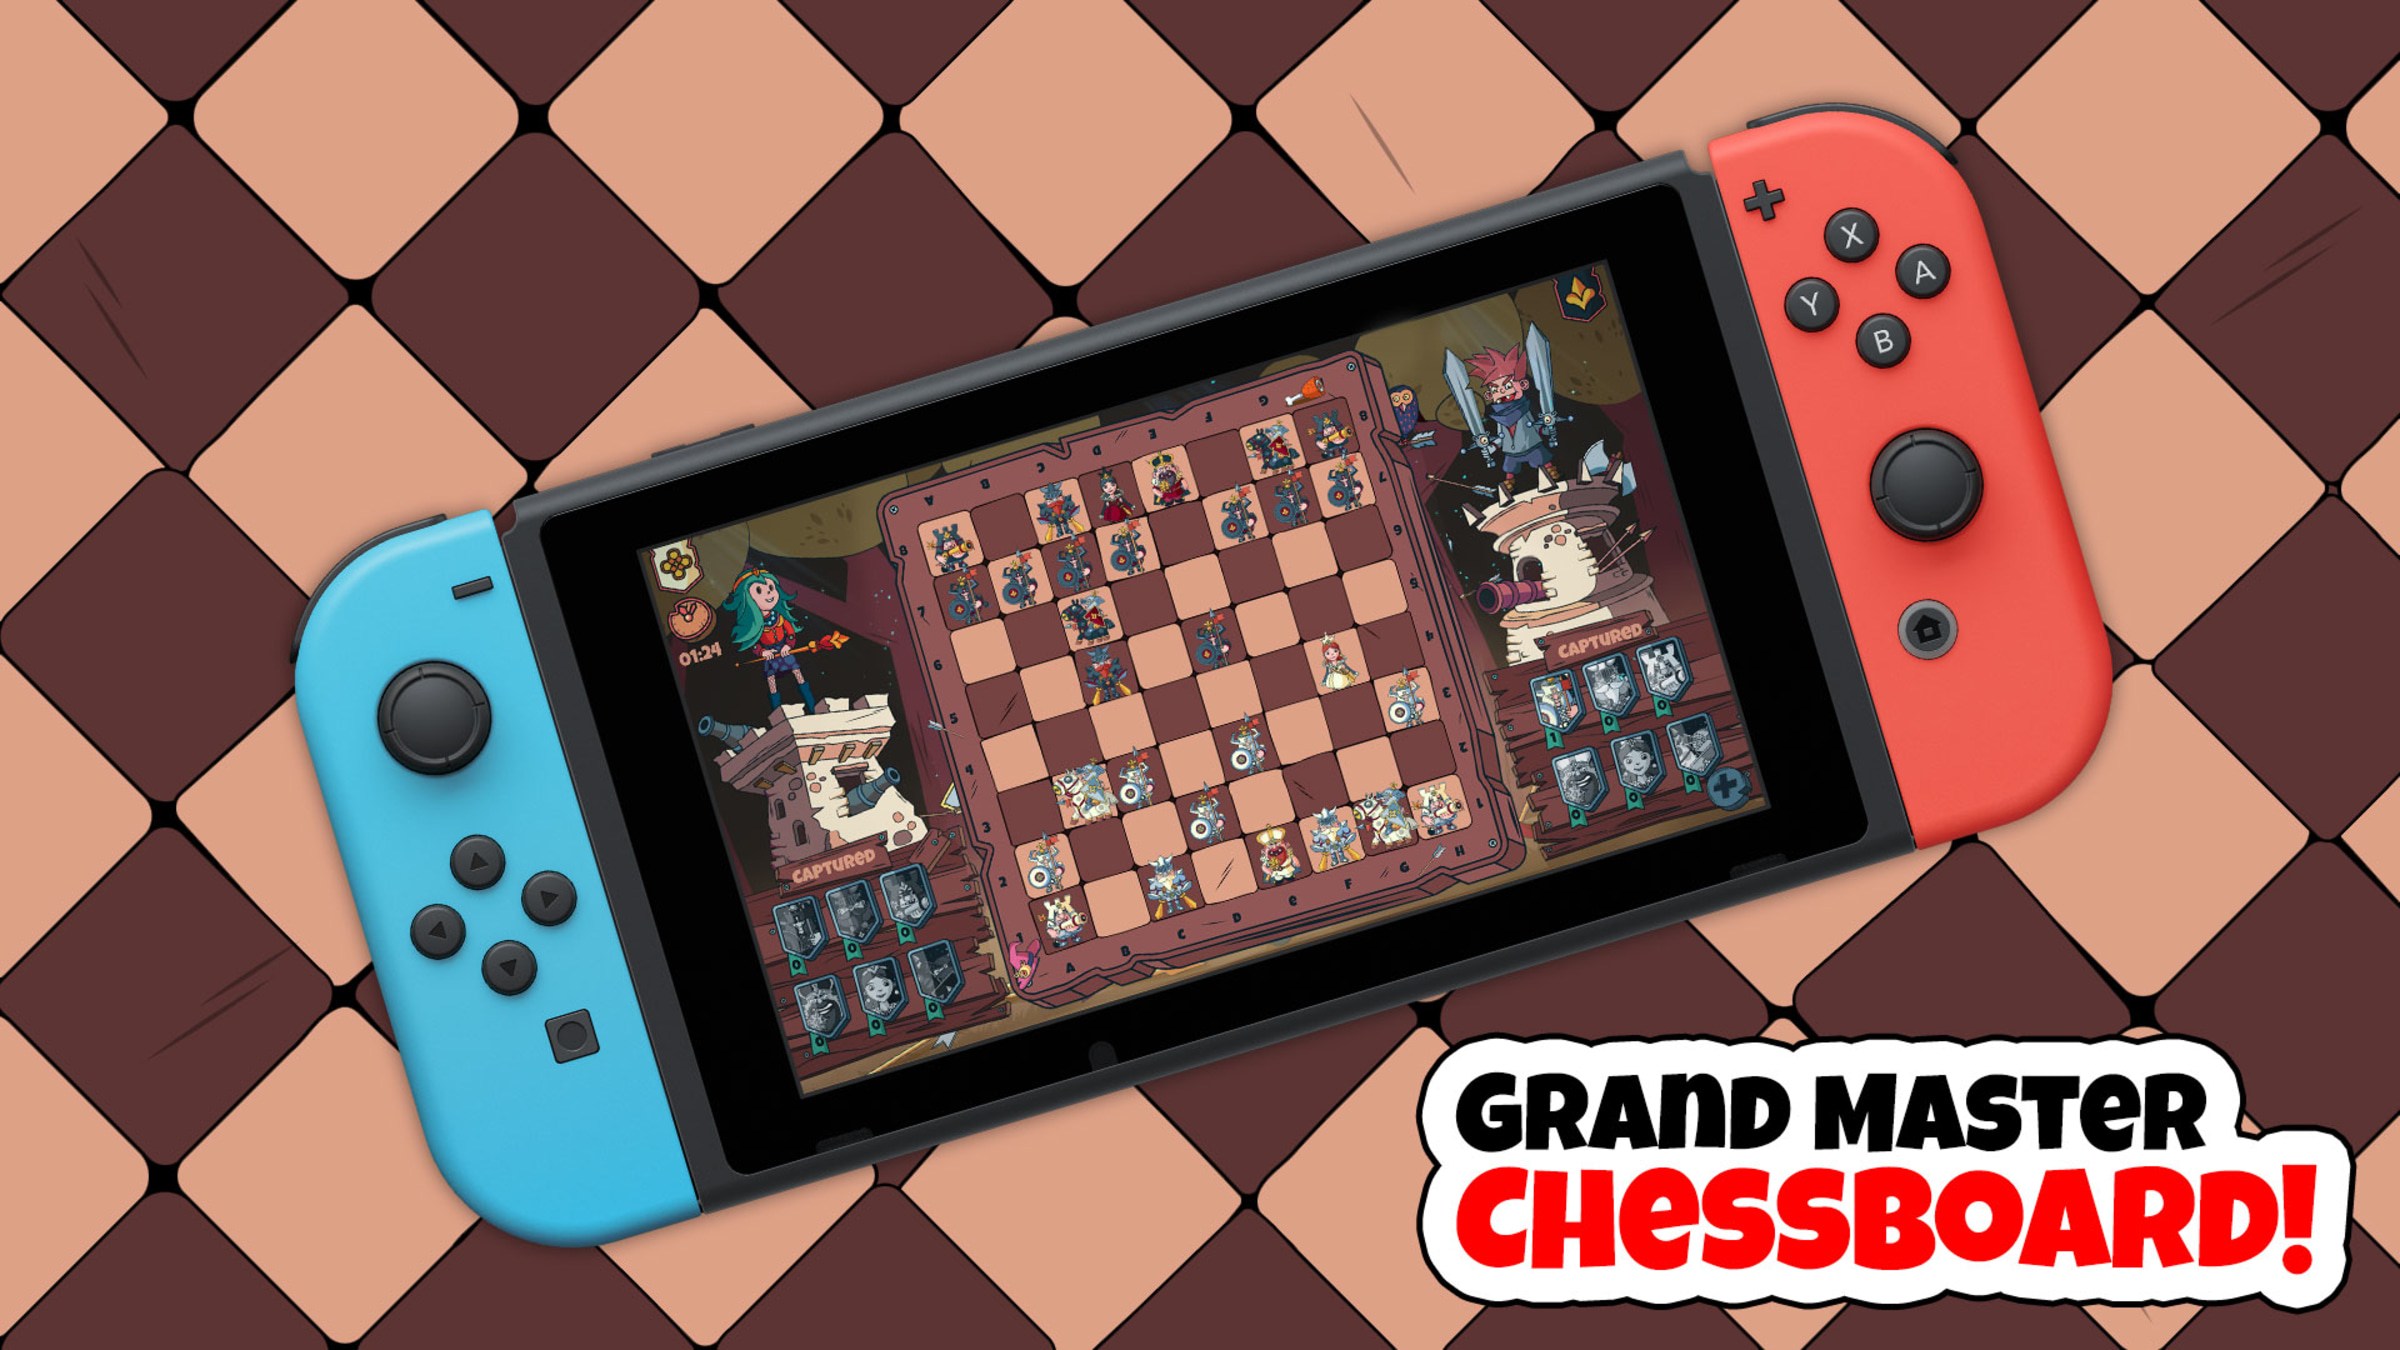 Chess Royal for Nintendo Switch - Nintendo Official Site